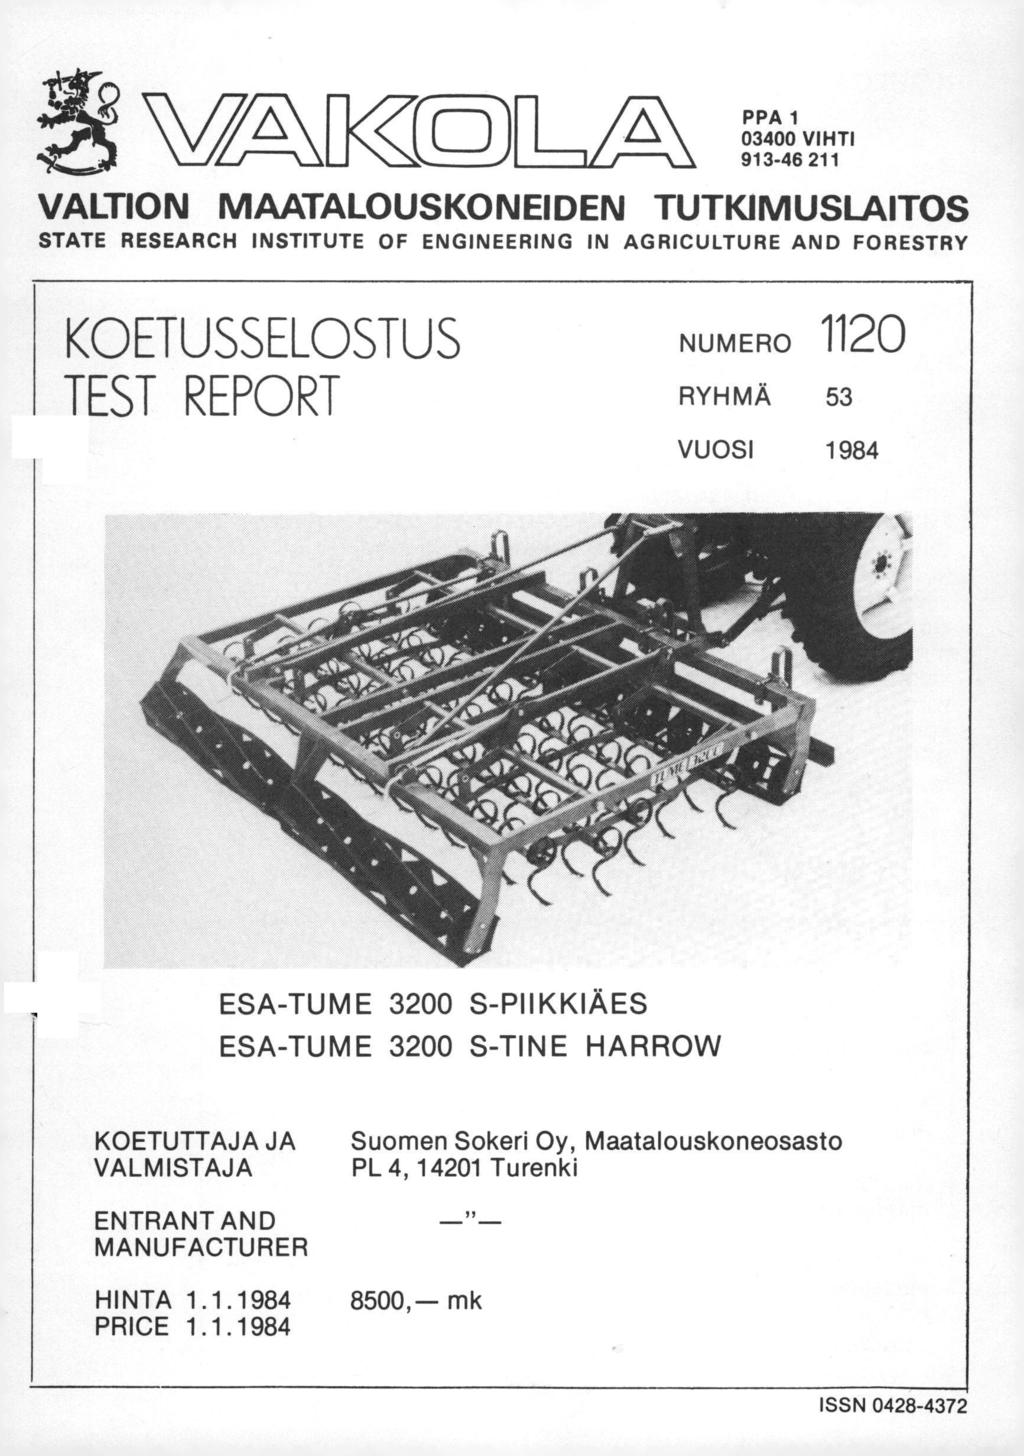 V/A-MnJ PPA 1 I/A- 03400 VIHTI 913-46 211 VALTION MAATALOUSKONEIDEN TUTKIMUSLAITOS STATE RESEARCH INSTITUTE OF ENGINEERING IN AGRICULTURE AND FORESTRY KOETUSSELOSTUS TEST REPORT NUMERO 1120 RYHMÄ 53